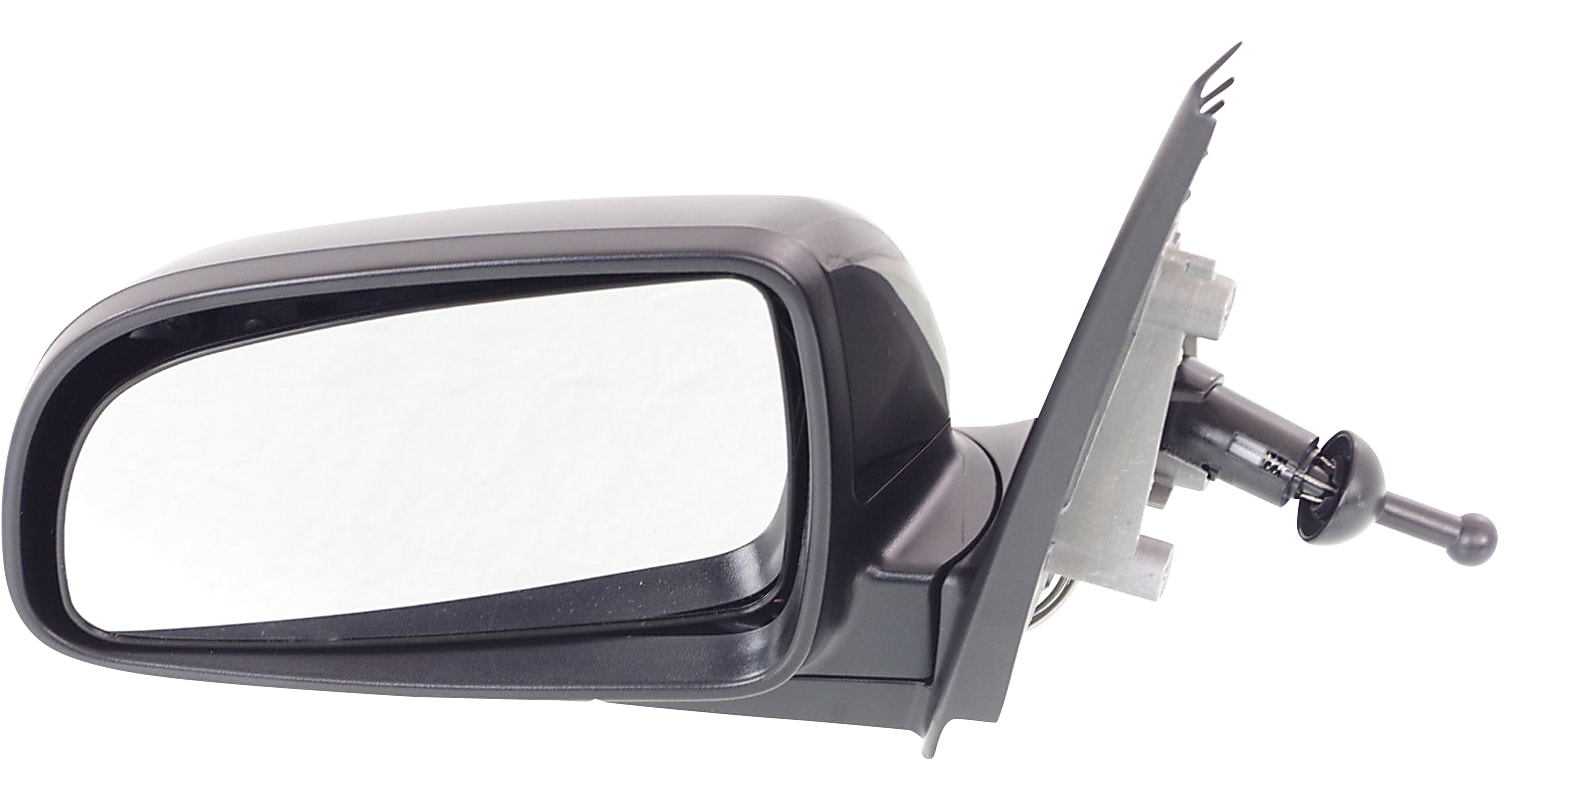 FOR 07-11 CHEVY AVEO AVEO5 OE STYLE LH LEFT SIDE MIRROR GLASS W/HEATED 95214066 